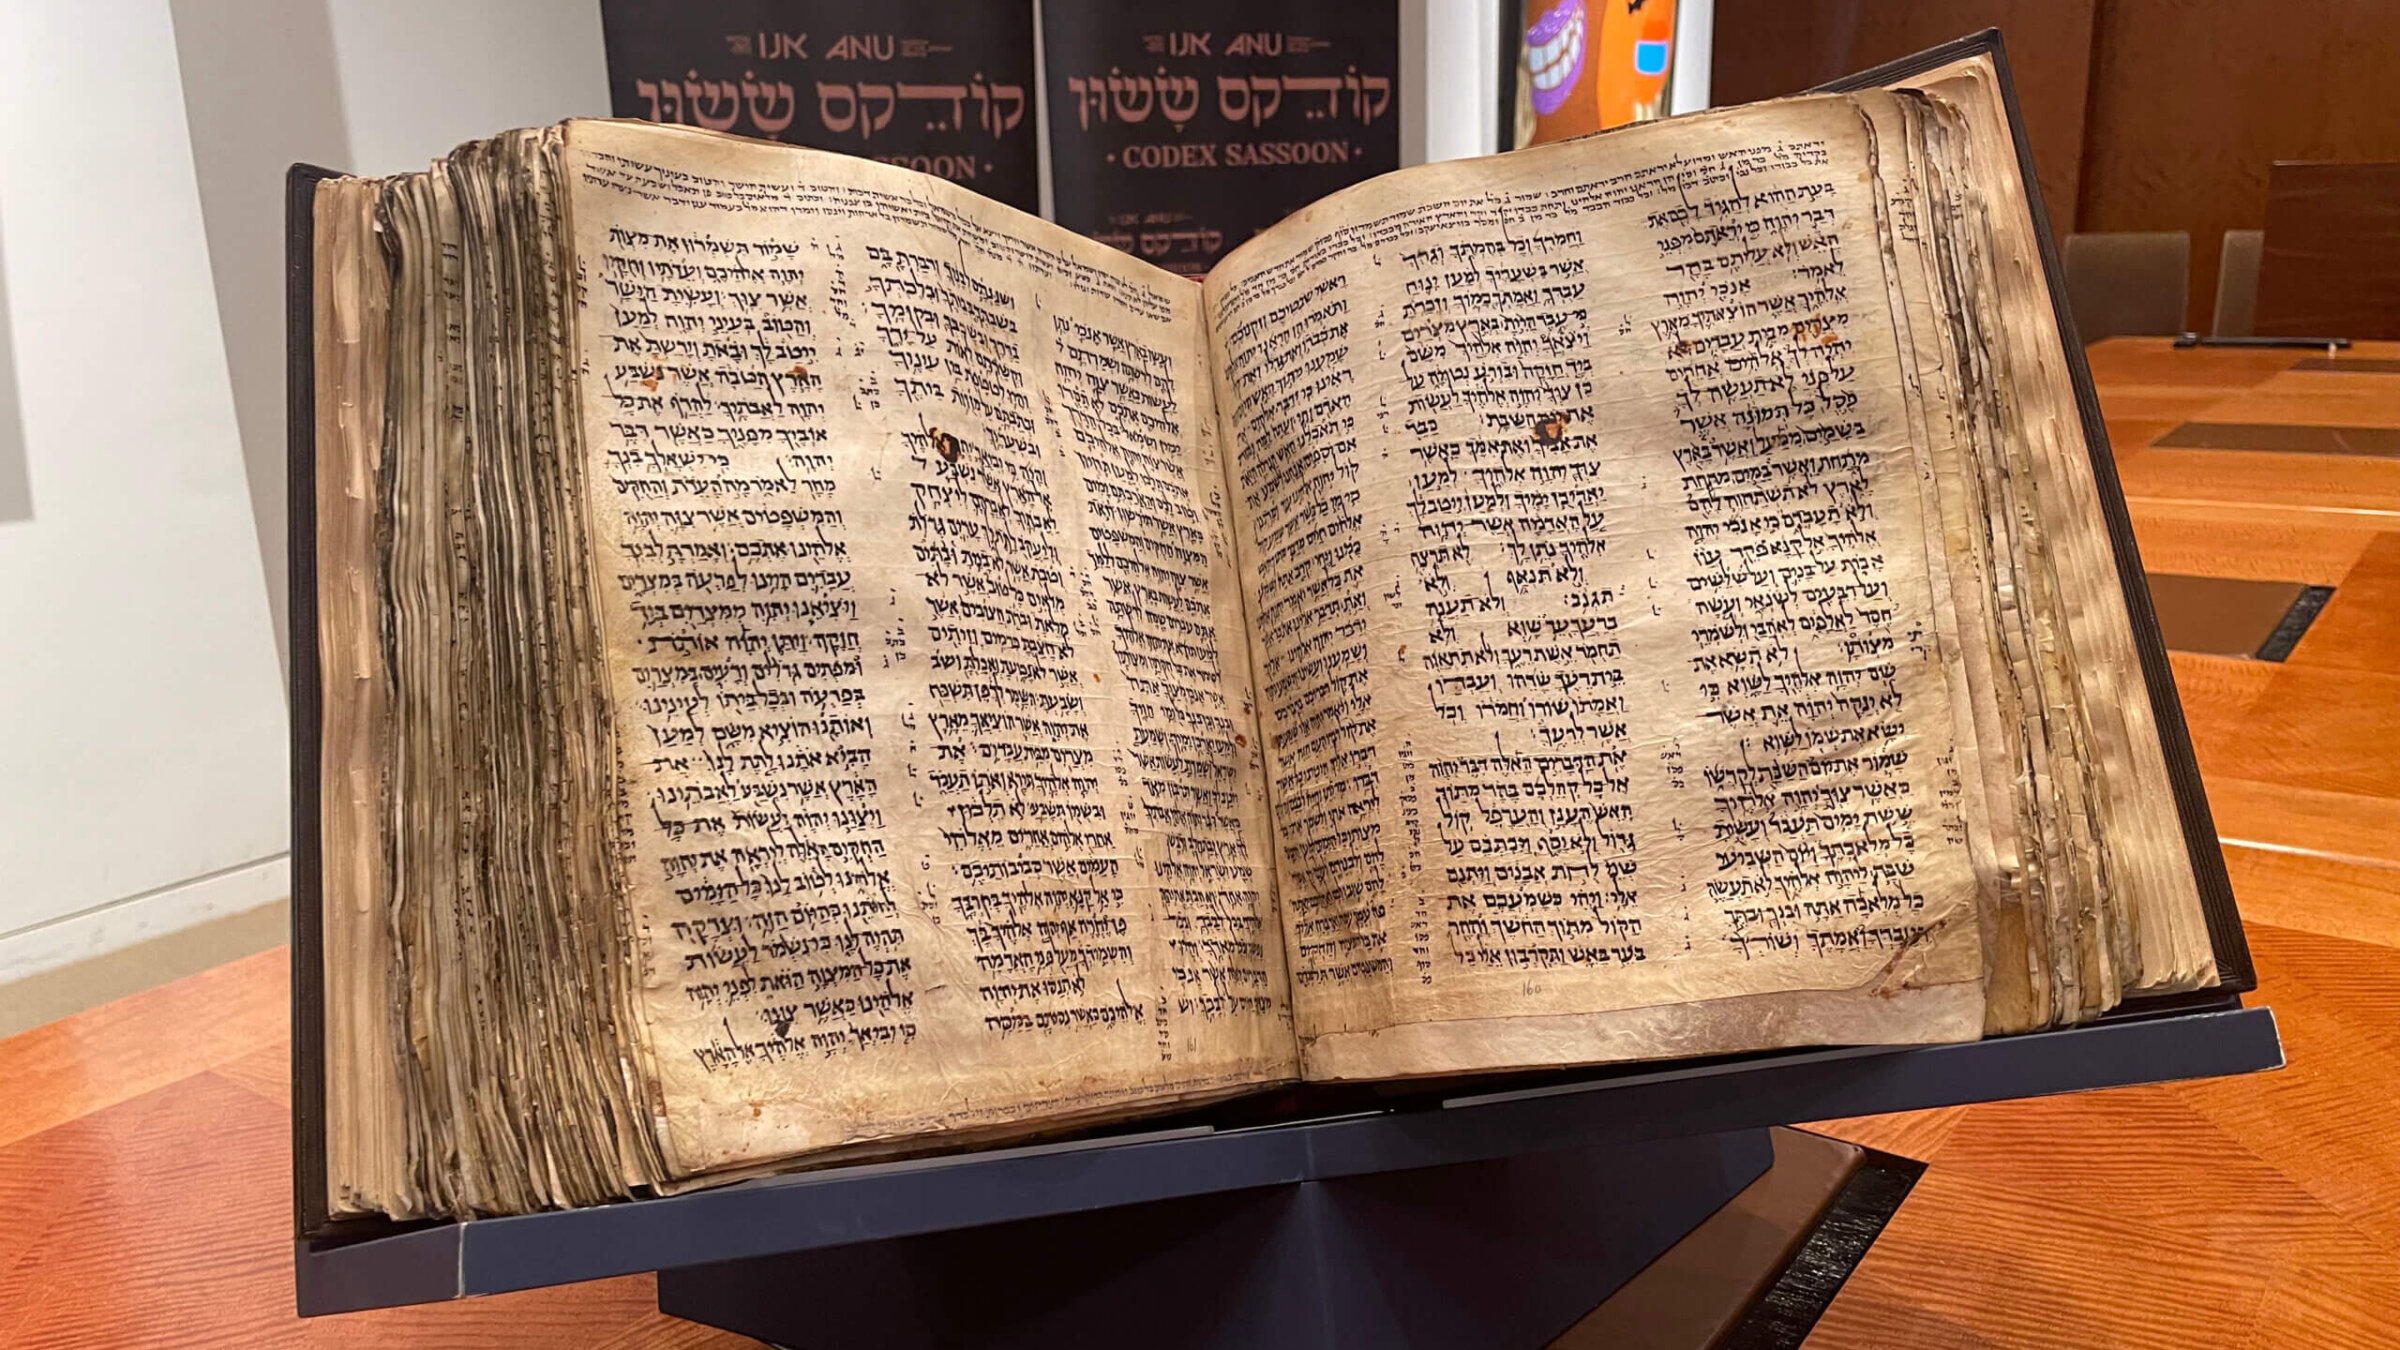 The Codex Sassoon, the oldest surviving copy of the Hebrew Bible, made a permanent move to Israel this week.